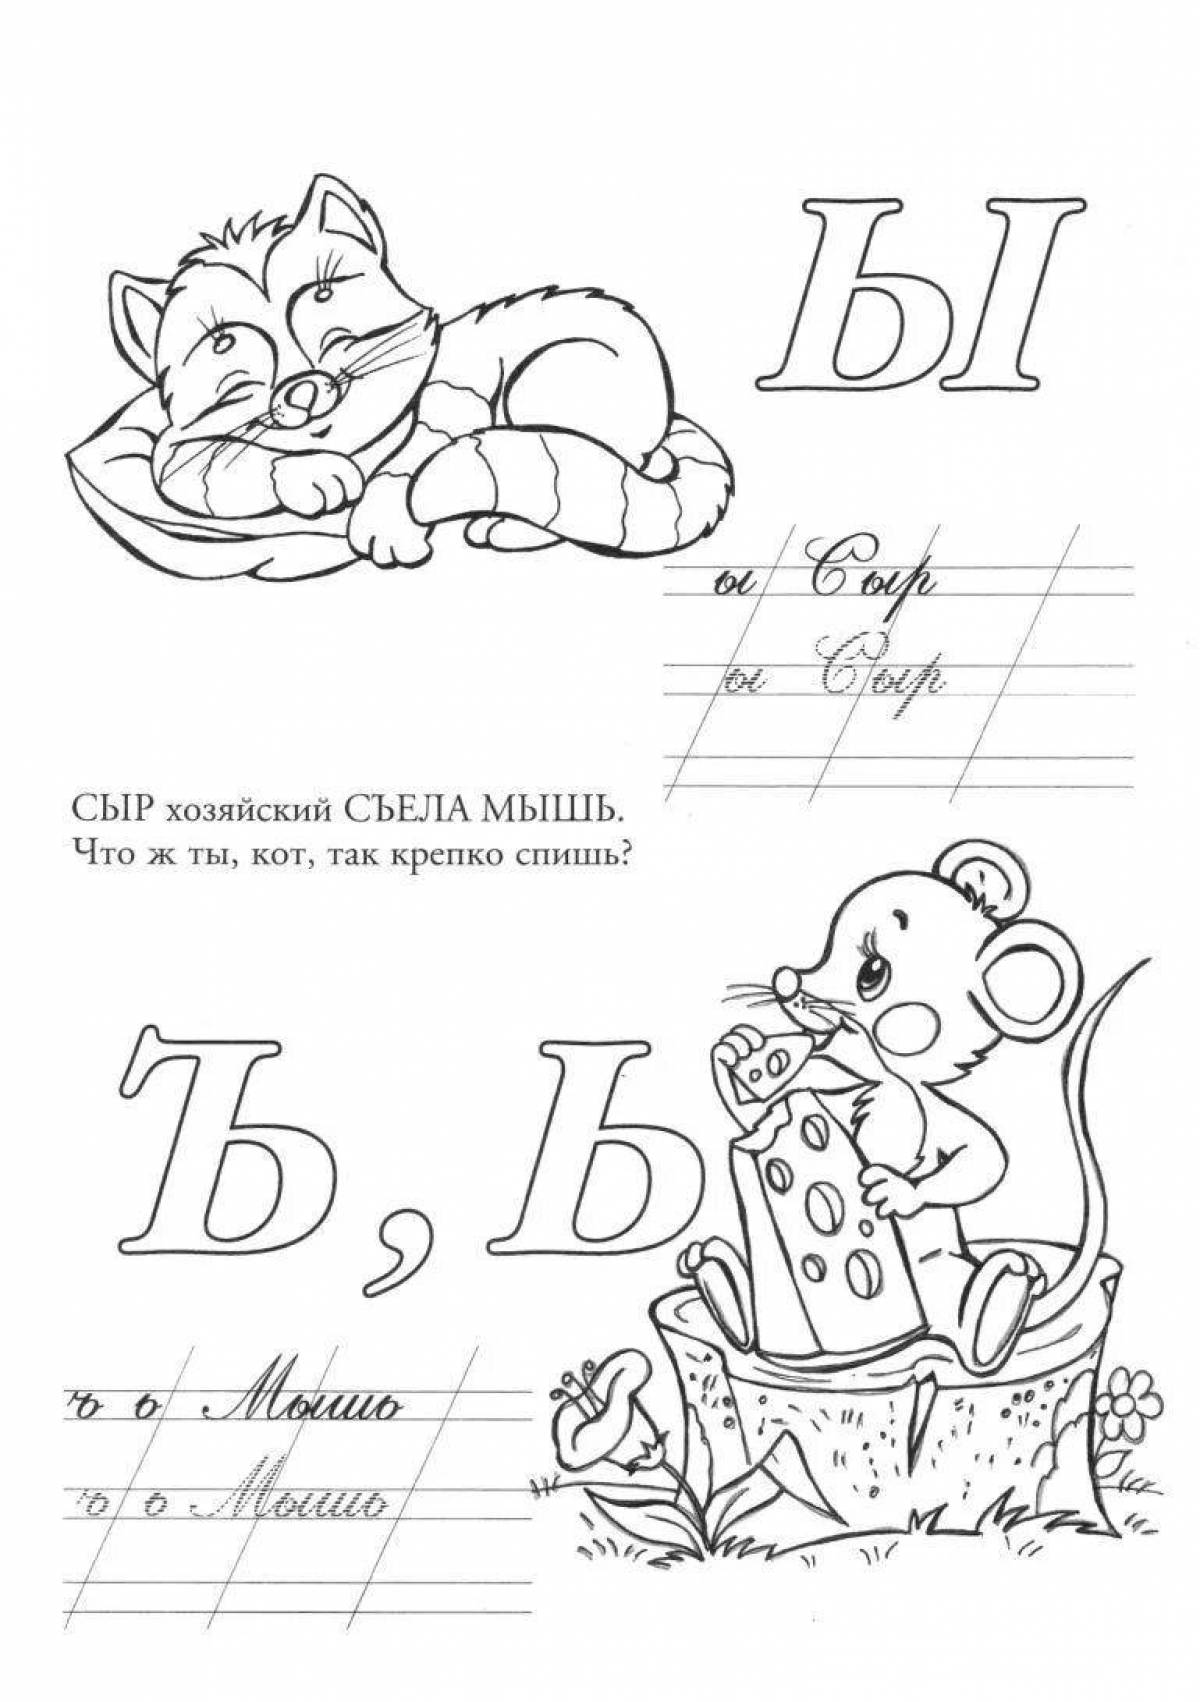 Fun coloring spelling of the alphabet